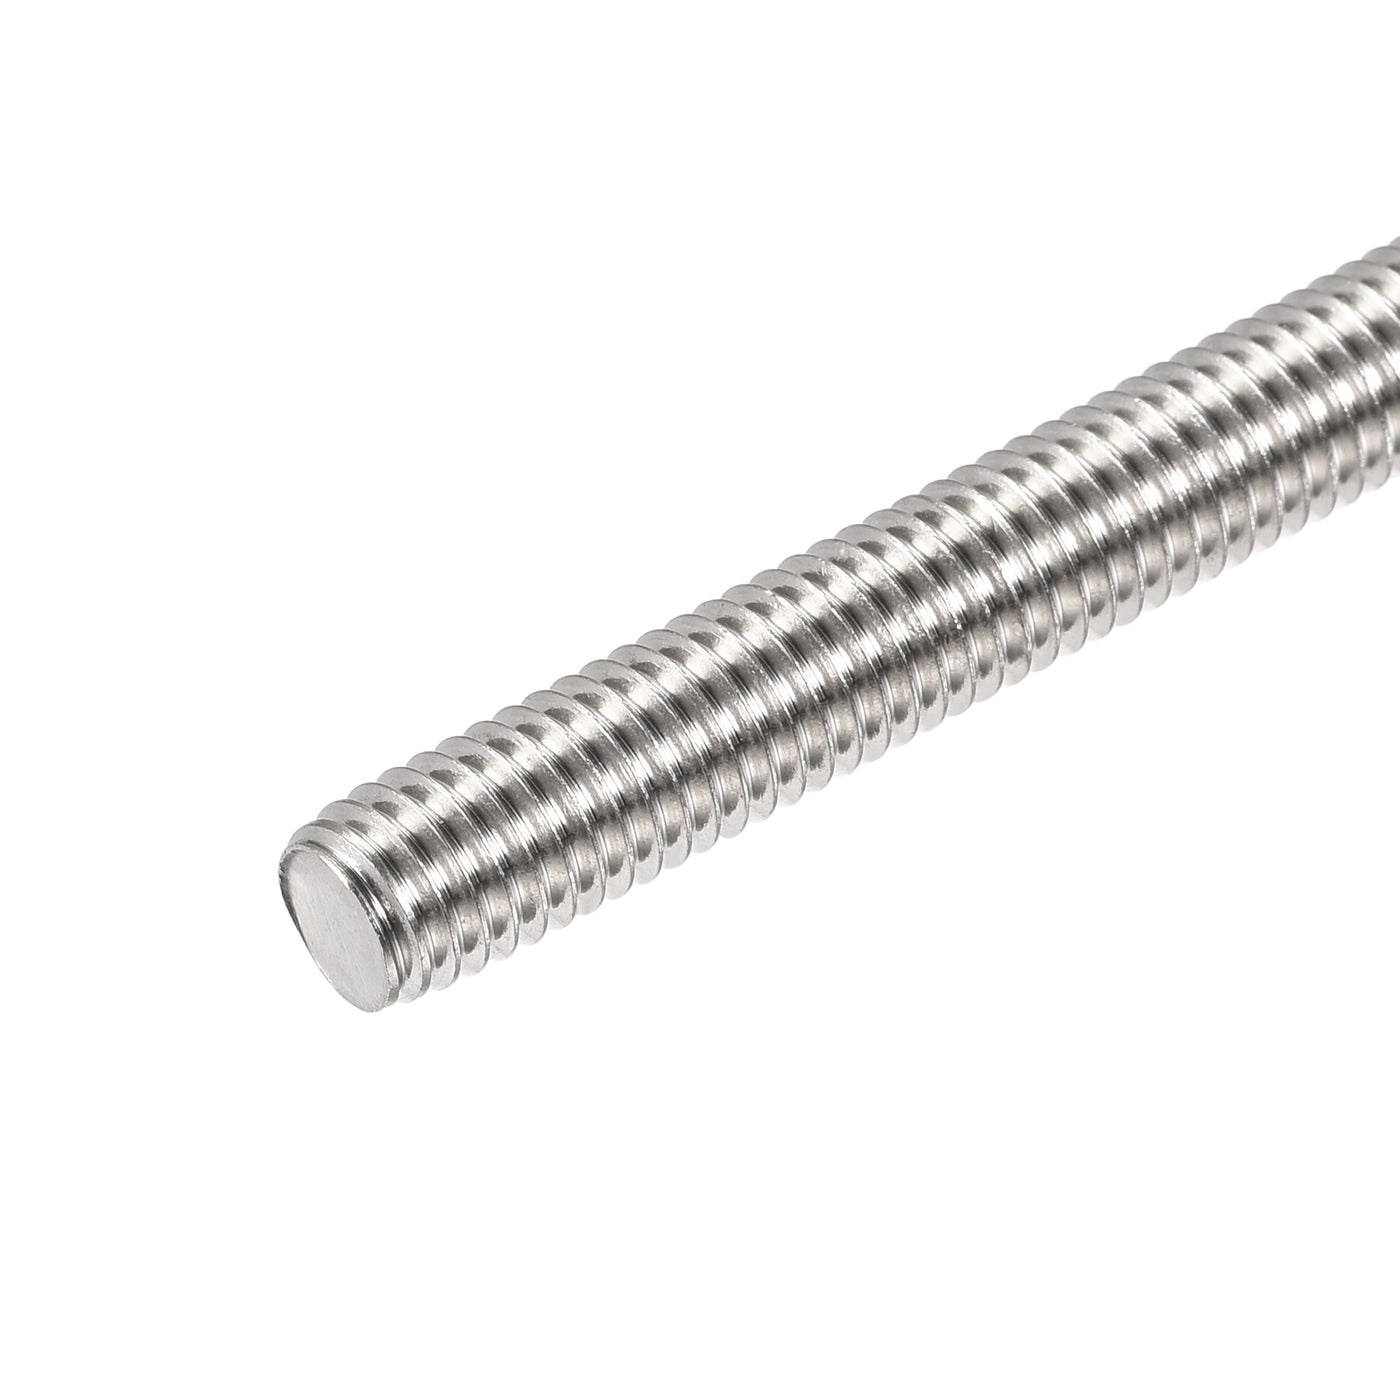 uxcell Uxcell 4pcs M4 x 200mm Fully Threaded Rod 304 Stainless Steel Right Hand Threads